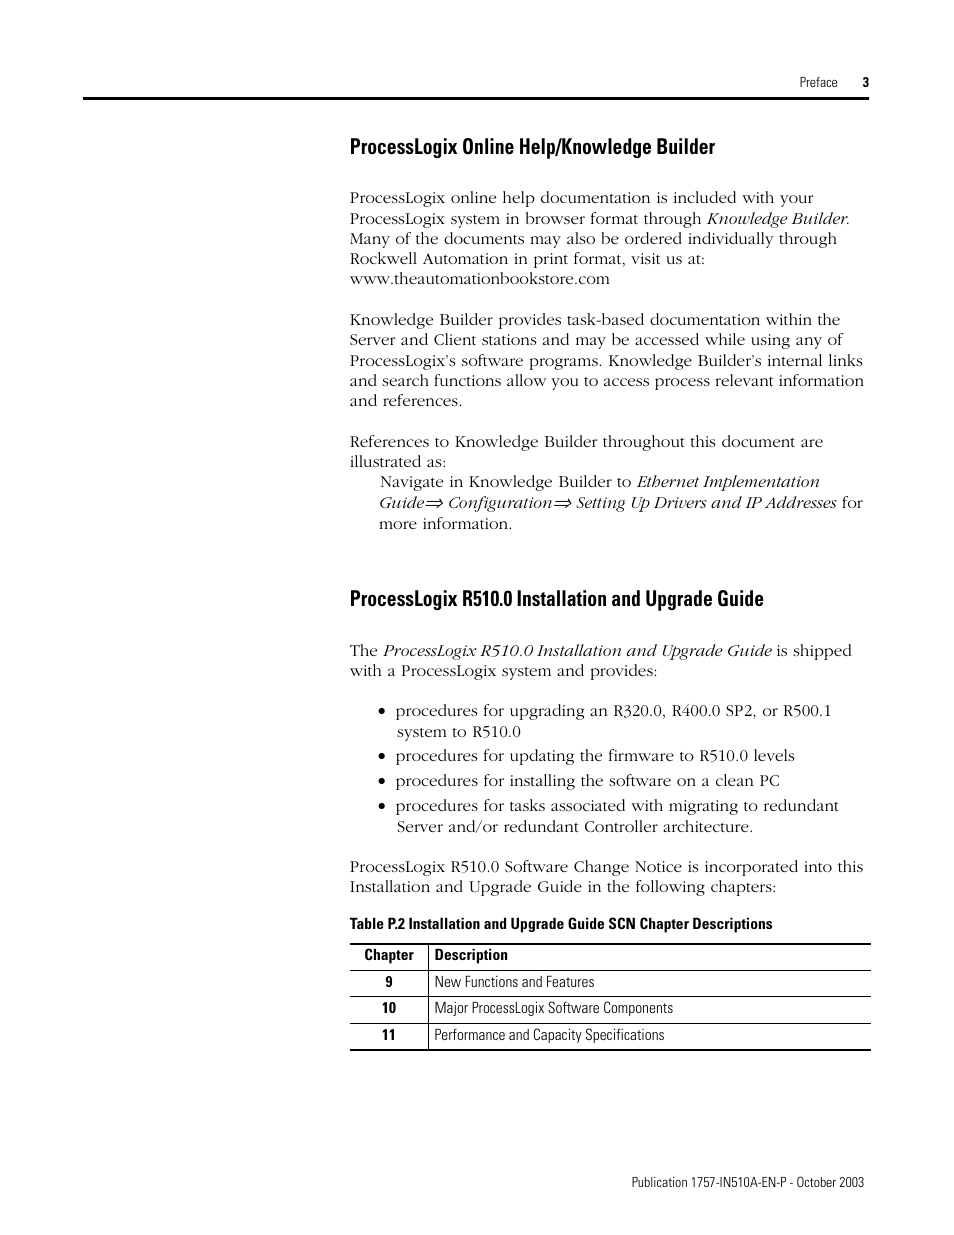 Processlogix online help/knowledge builder, Processlogix r510.0 installation and upgrade guide | Rockwell Automation 1757-SWKIT5100 ProcessLogix R510.0 Installation and Upgrade Guide User Manual | Page 13 / 271